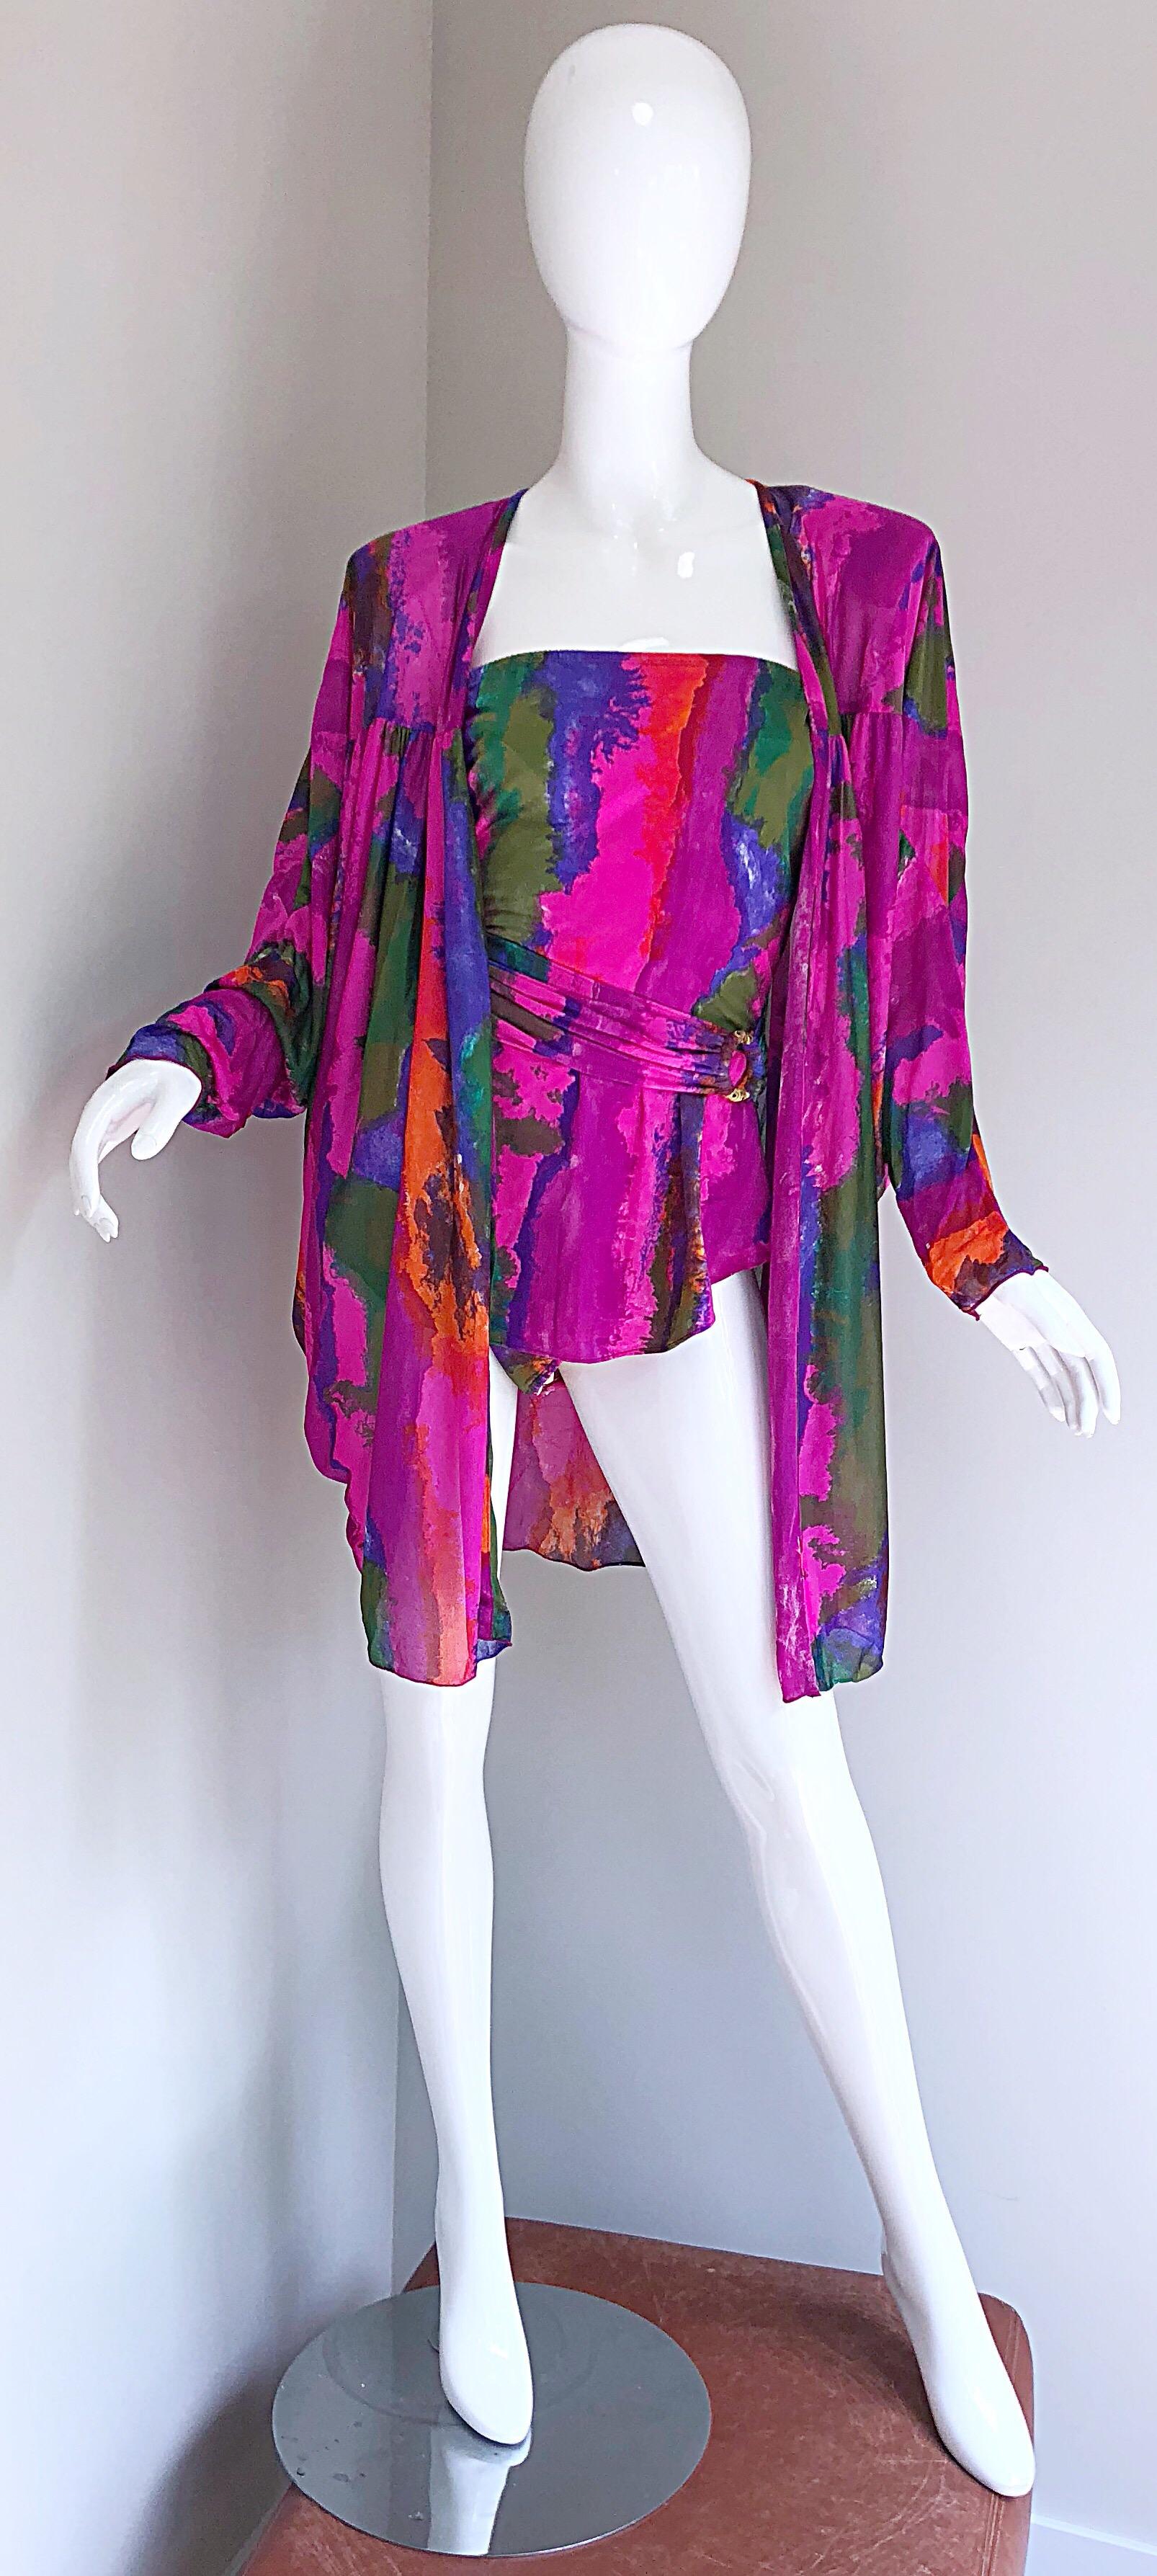 Fabulous vintage 1980s / 80s OSCAR DE LA RENTA strapless one piece swimsuit AND jacket cover up. Vibrant colors of hot pink, purple, fuchsia, chartreuse green, kelly green and orange. Beautiful watercolor print. Flattering ruching detail at waist